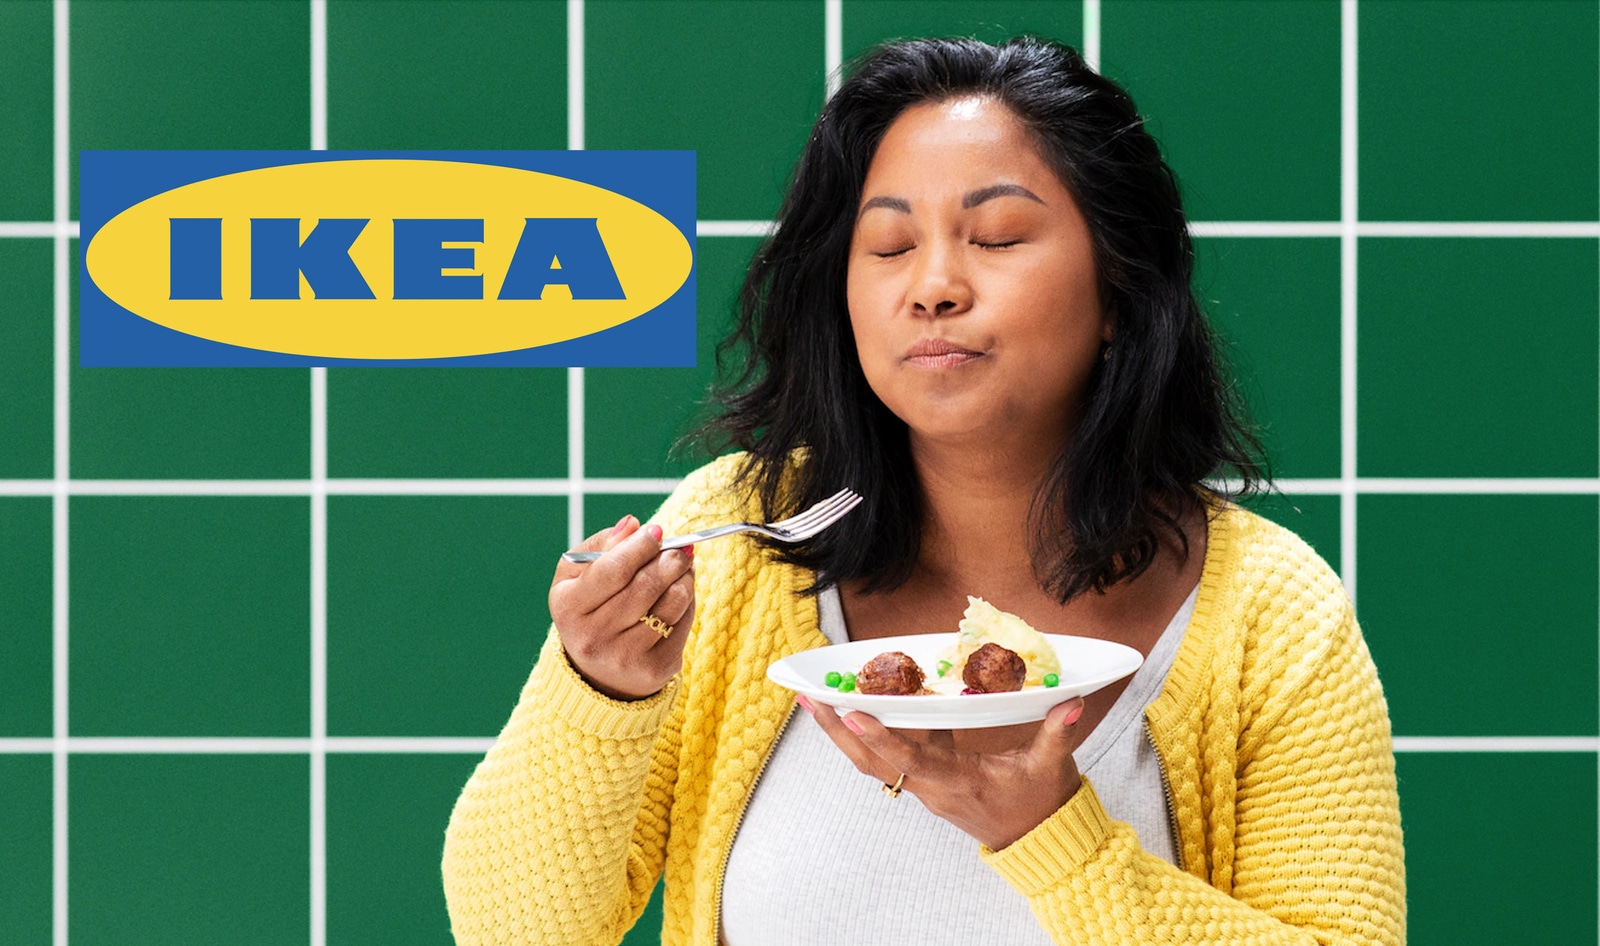 Job Interviews at IKEA Now Come with 3D-Printed Vegan Meatballs